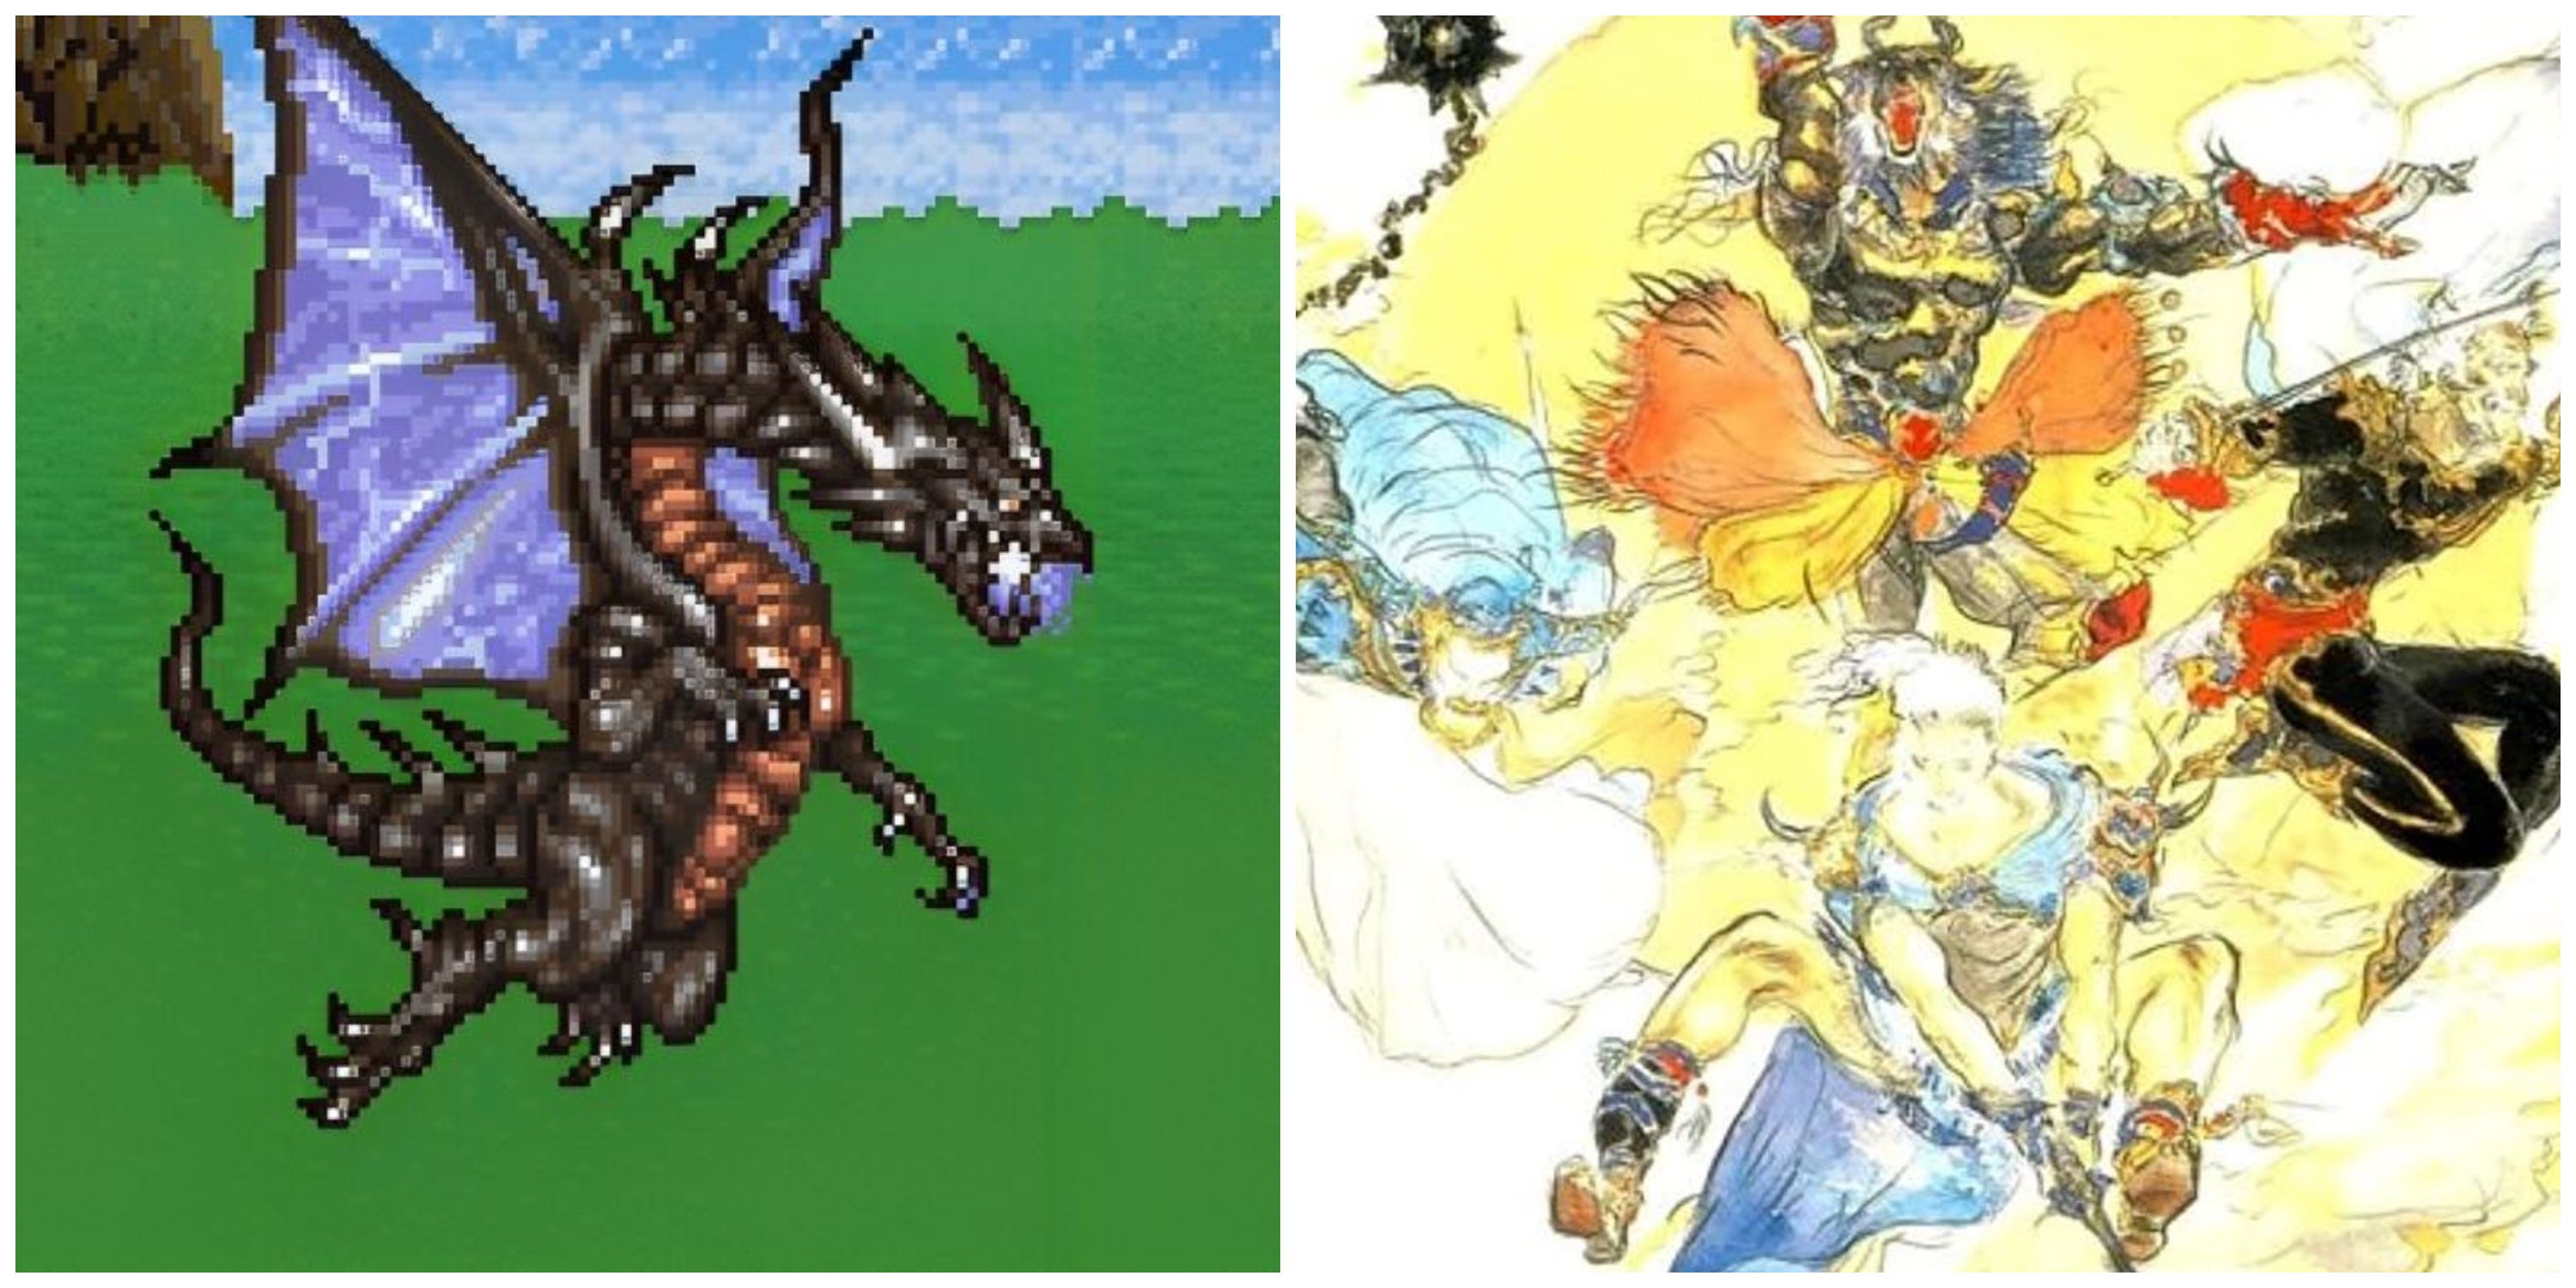 Final Fantasy 5: All Versions, Ranked